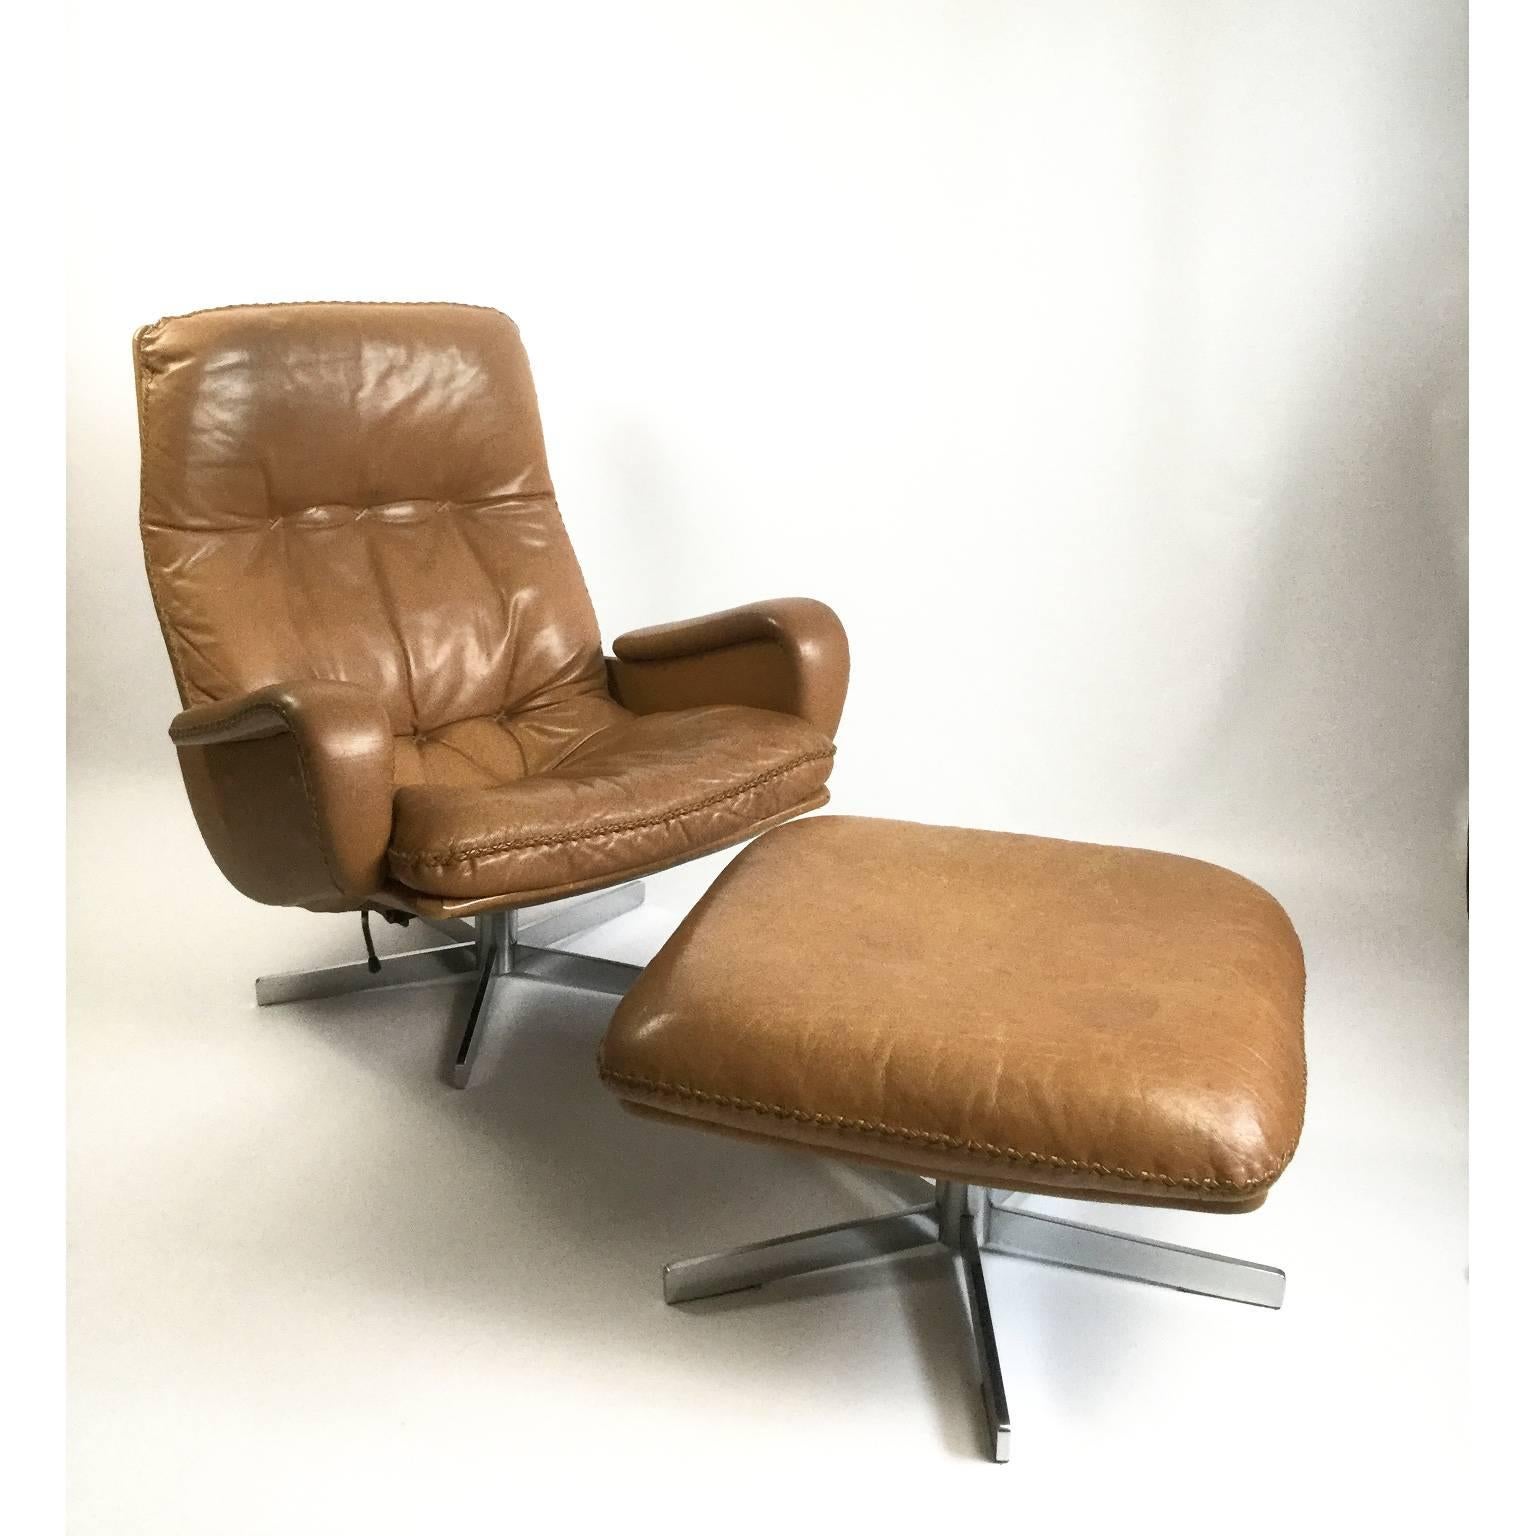 Pair of De Sede s231 swivel leather lounge armchairs with an ottoman.
Manufactured in 1960s by the well-known furniture maker De Sede in Switzerland.
The same model s231 was used as prop in 1969 in the James Bond film:
Her Majesty's Secret